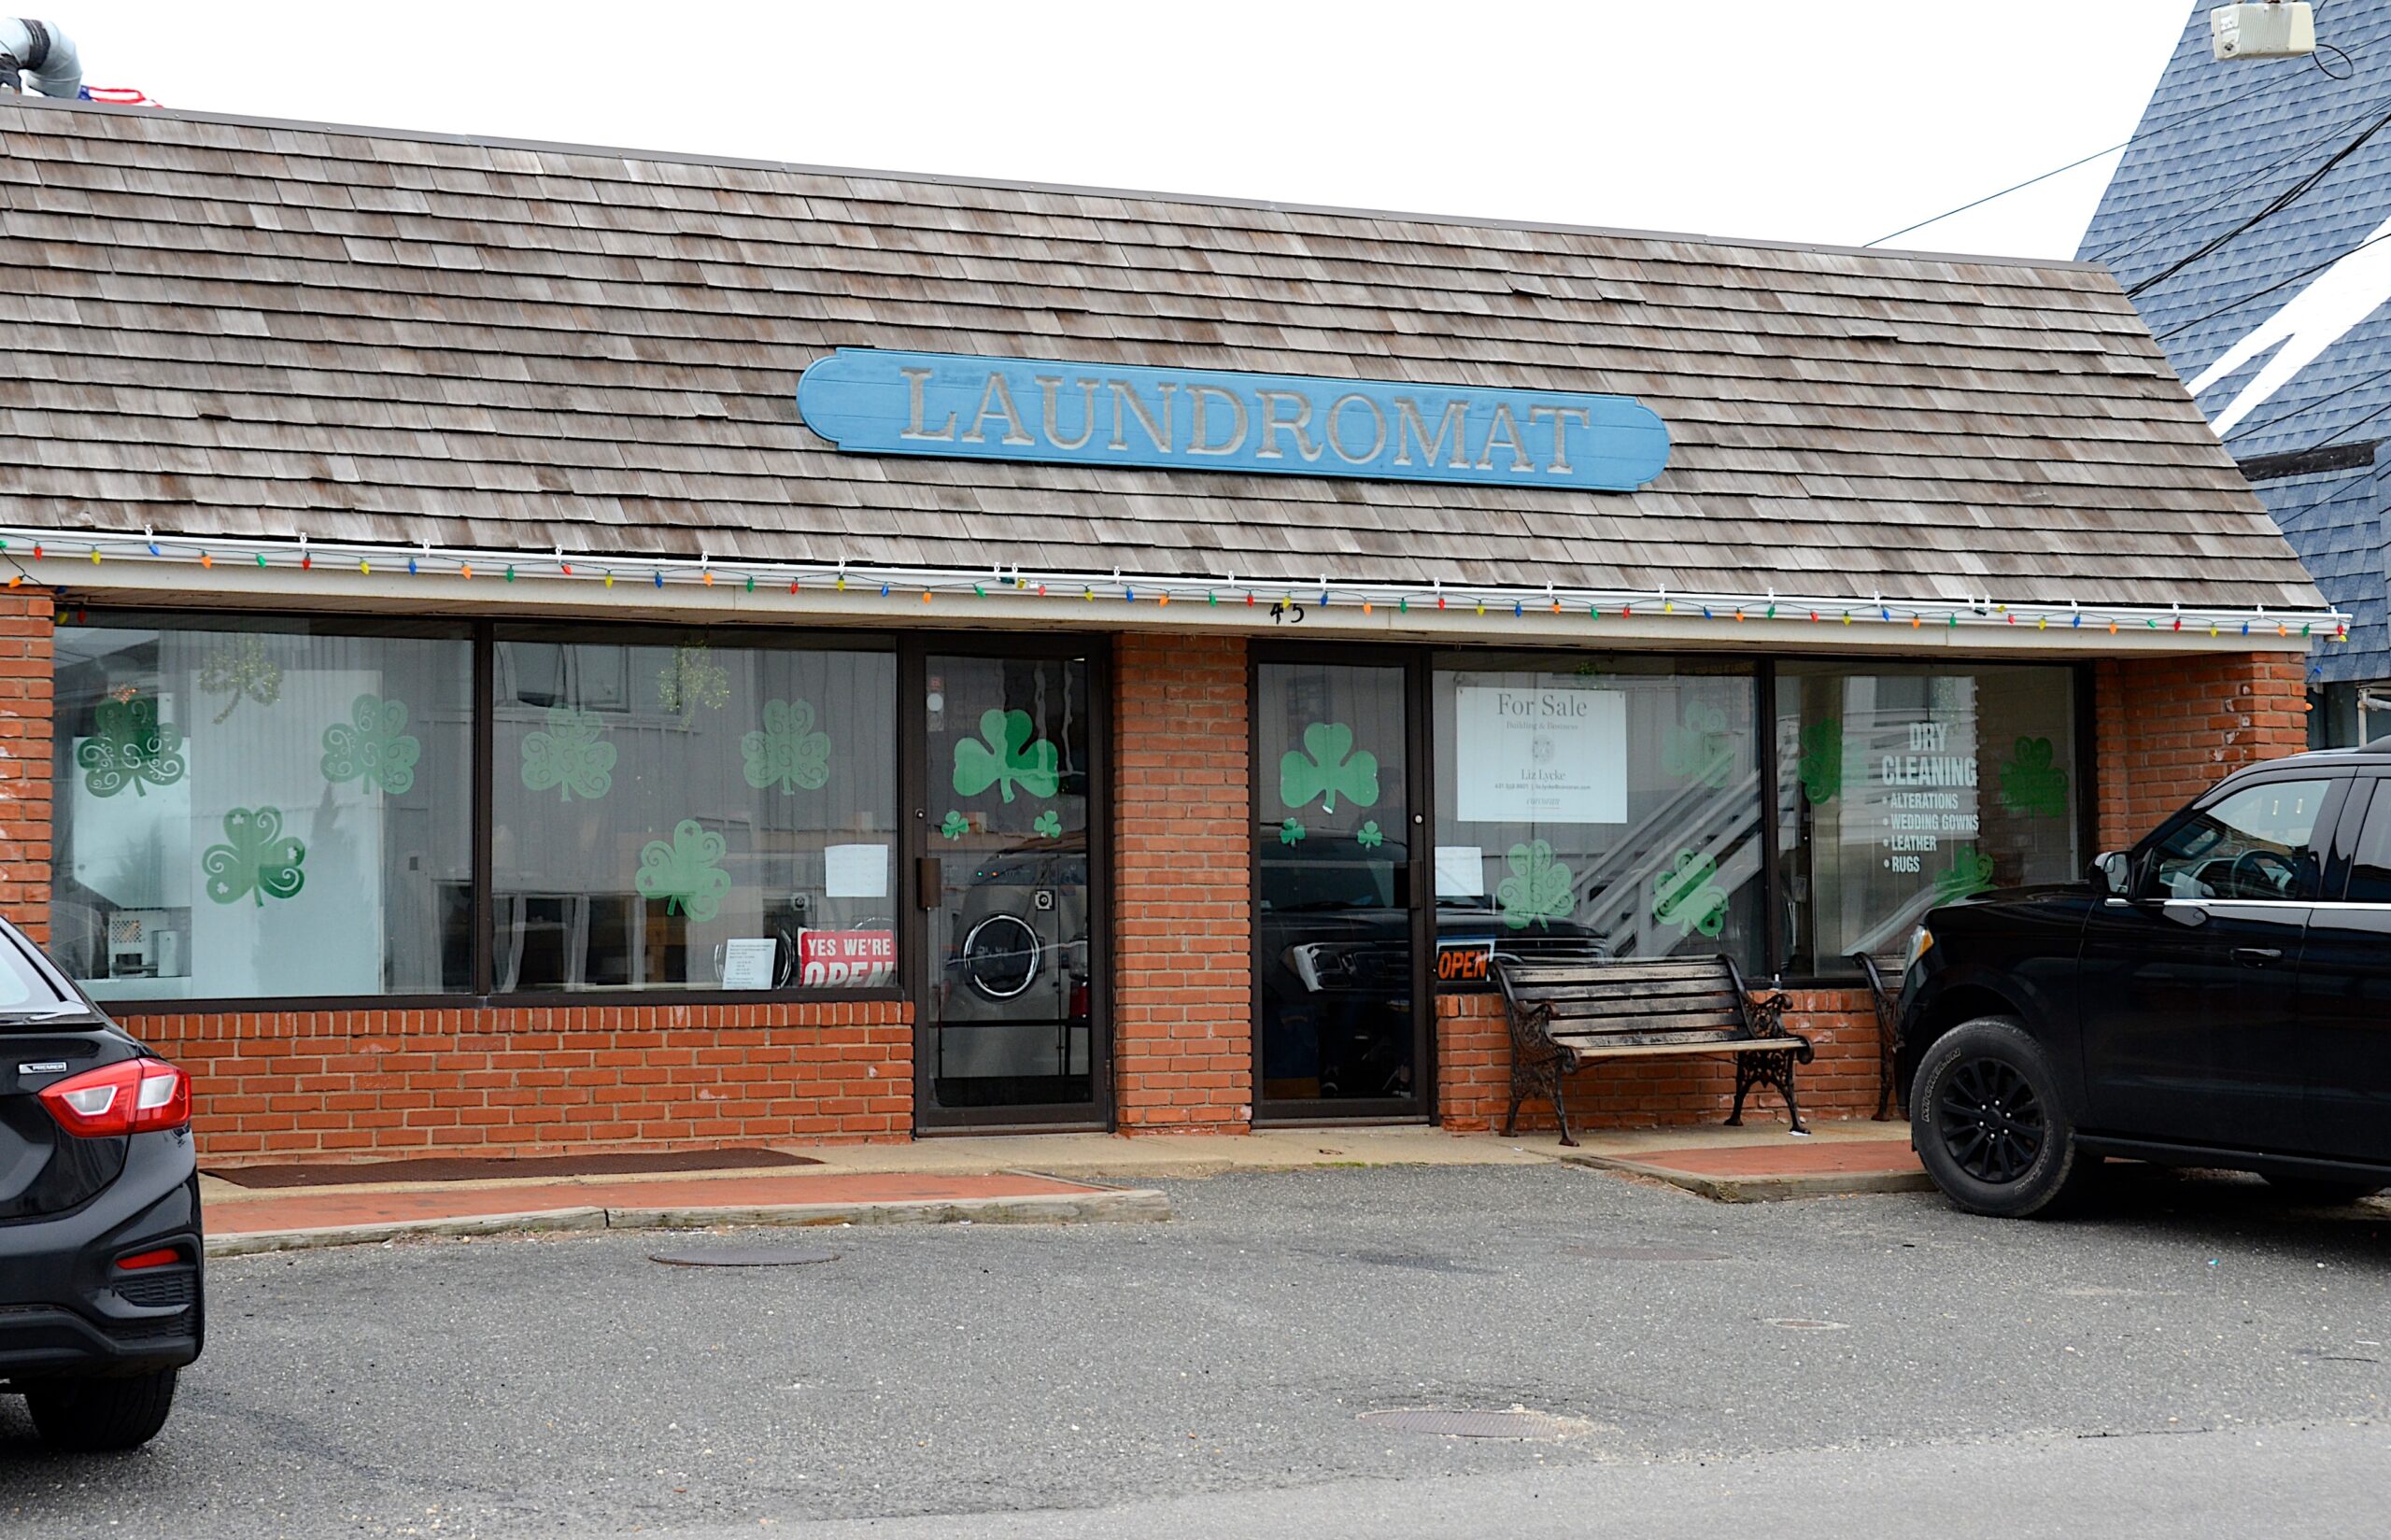 The Montauk Laundromat is for sale. Some fear that a new owner could choose a different business and leave many residents of the isolated hamlet out to dry for laundry services.